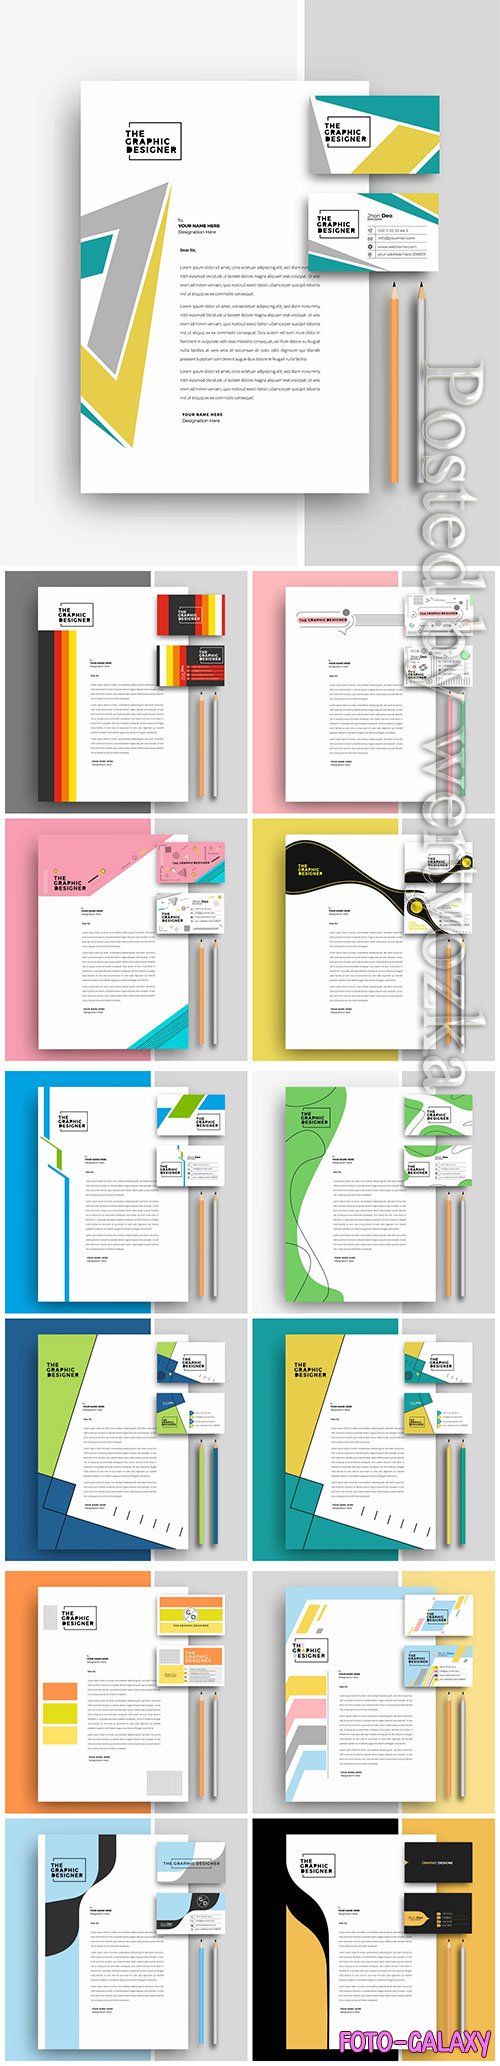 Business letterhead with business card templates design vector illustration